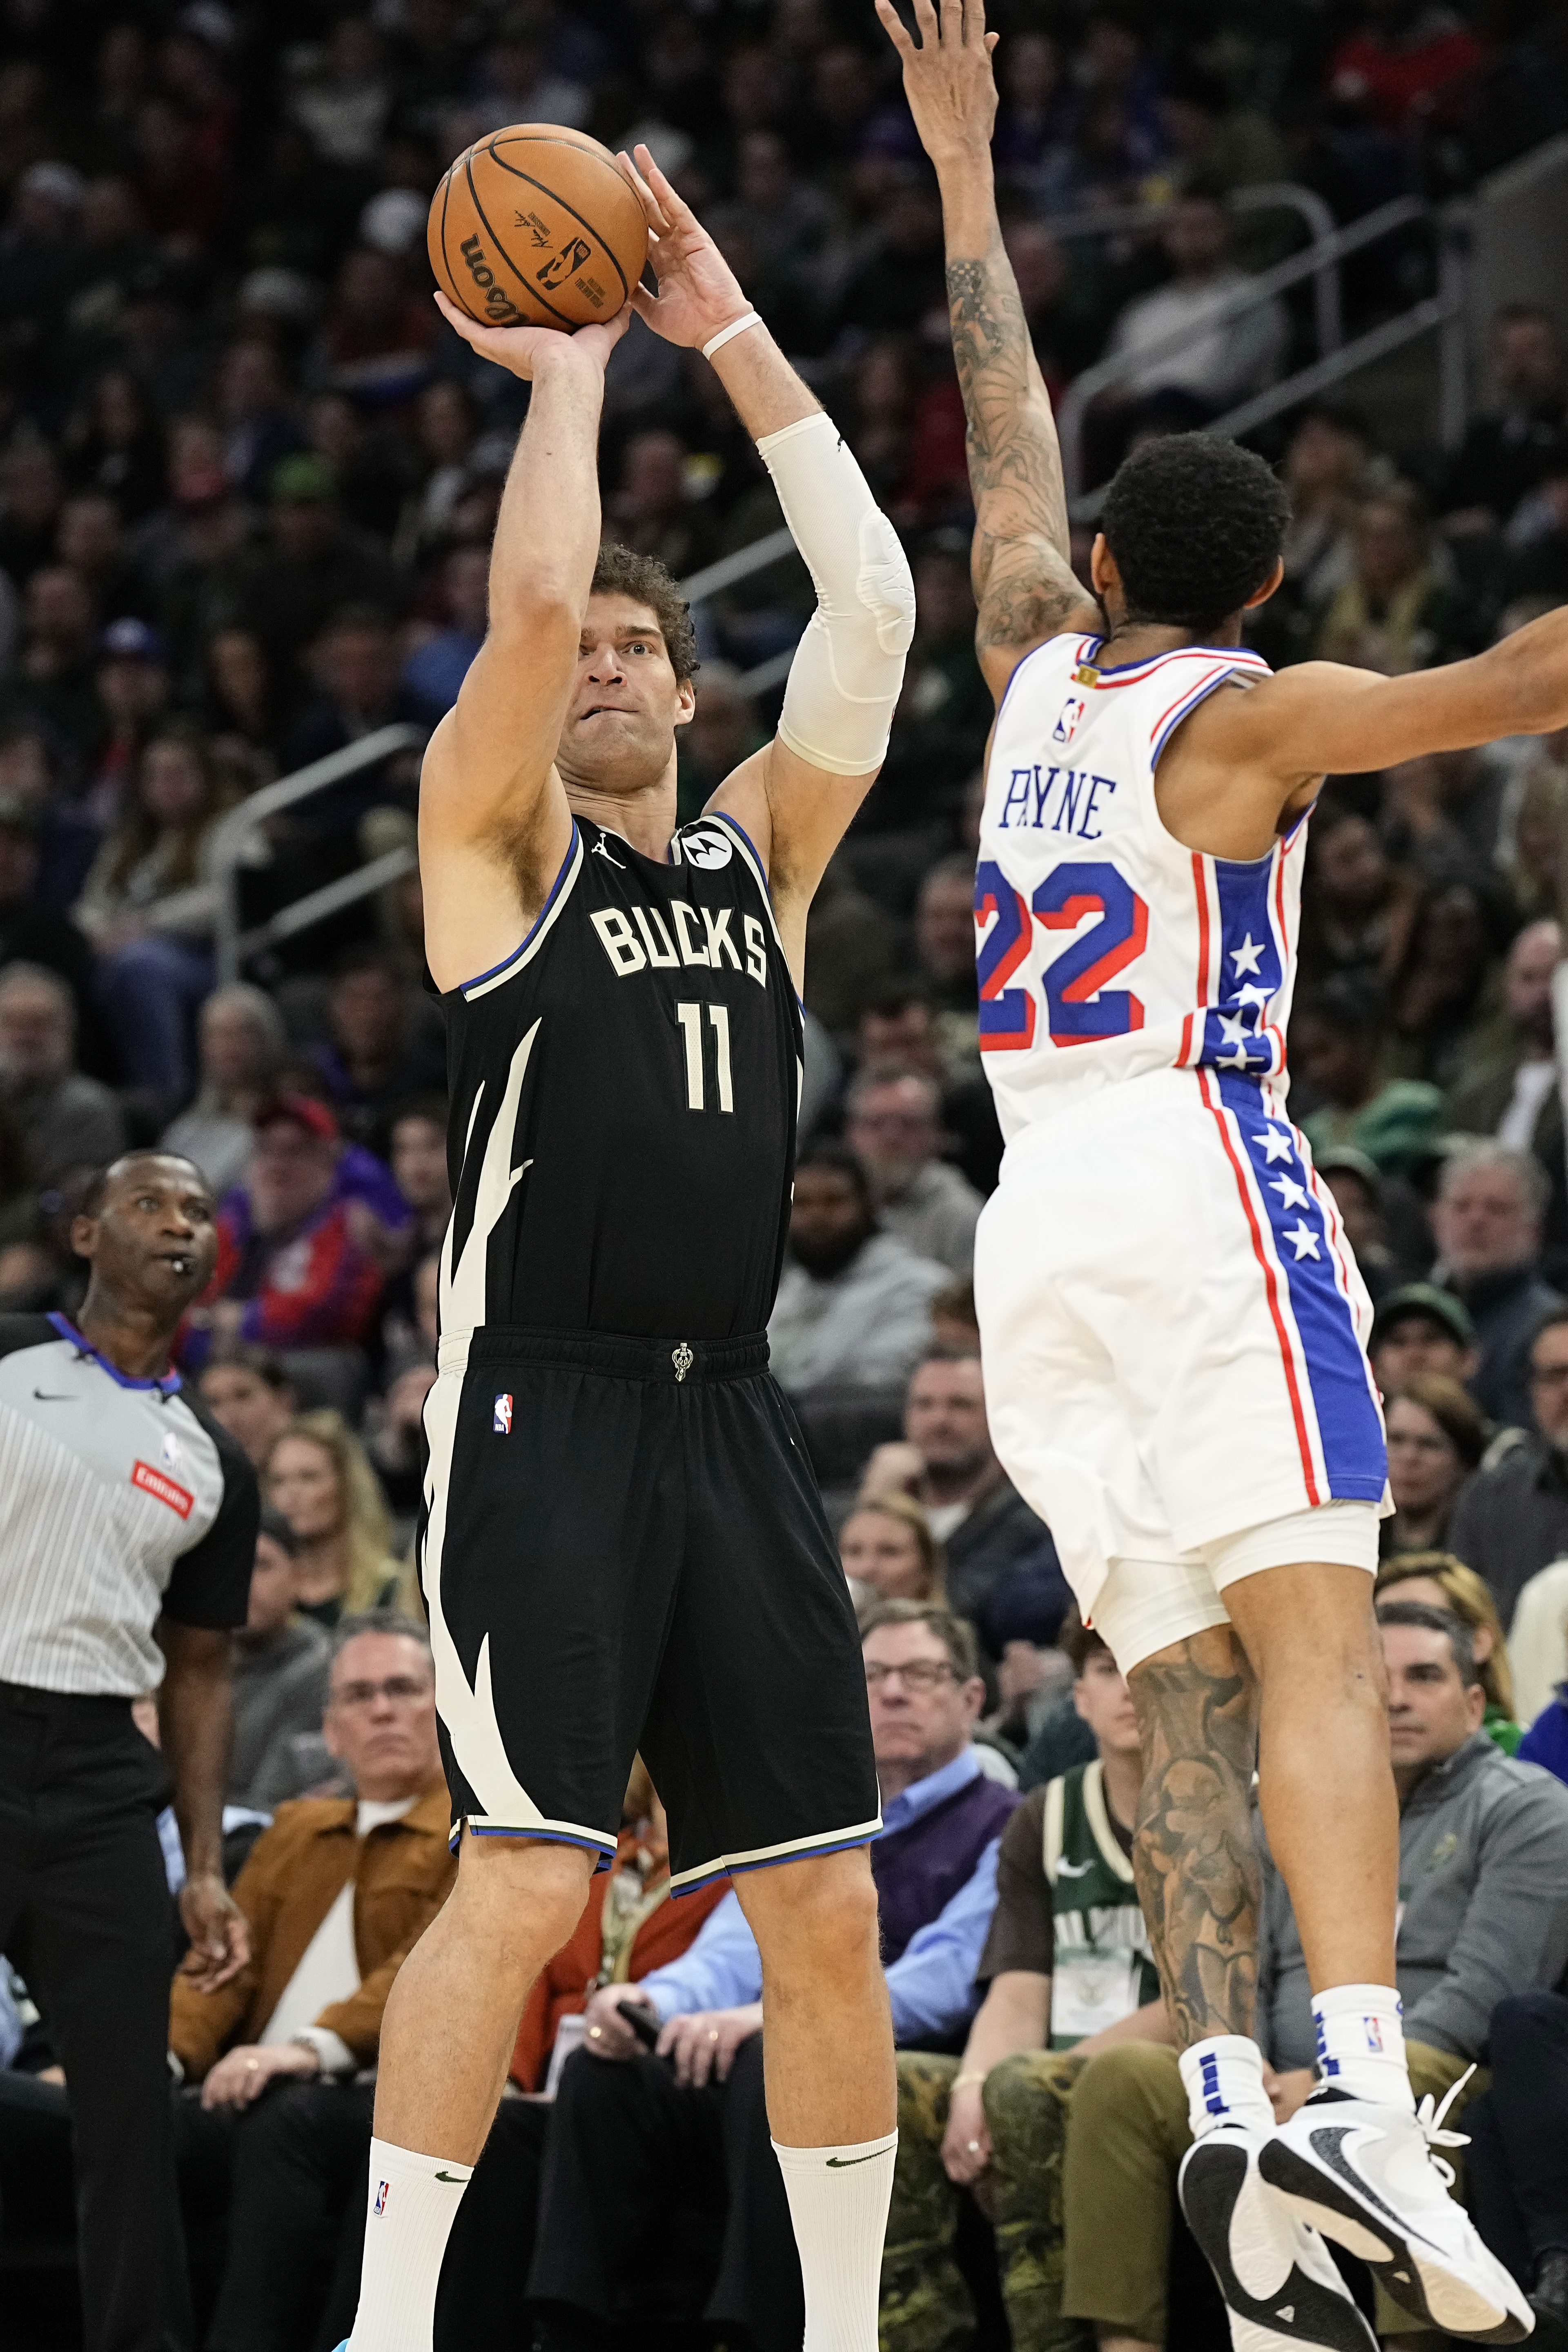 Giannis Antetokounmpo scores 32 points to lead the Bucks to a 114-105 win  over the 76ers